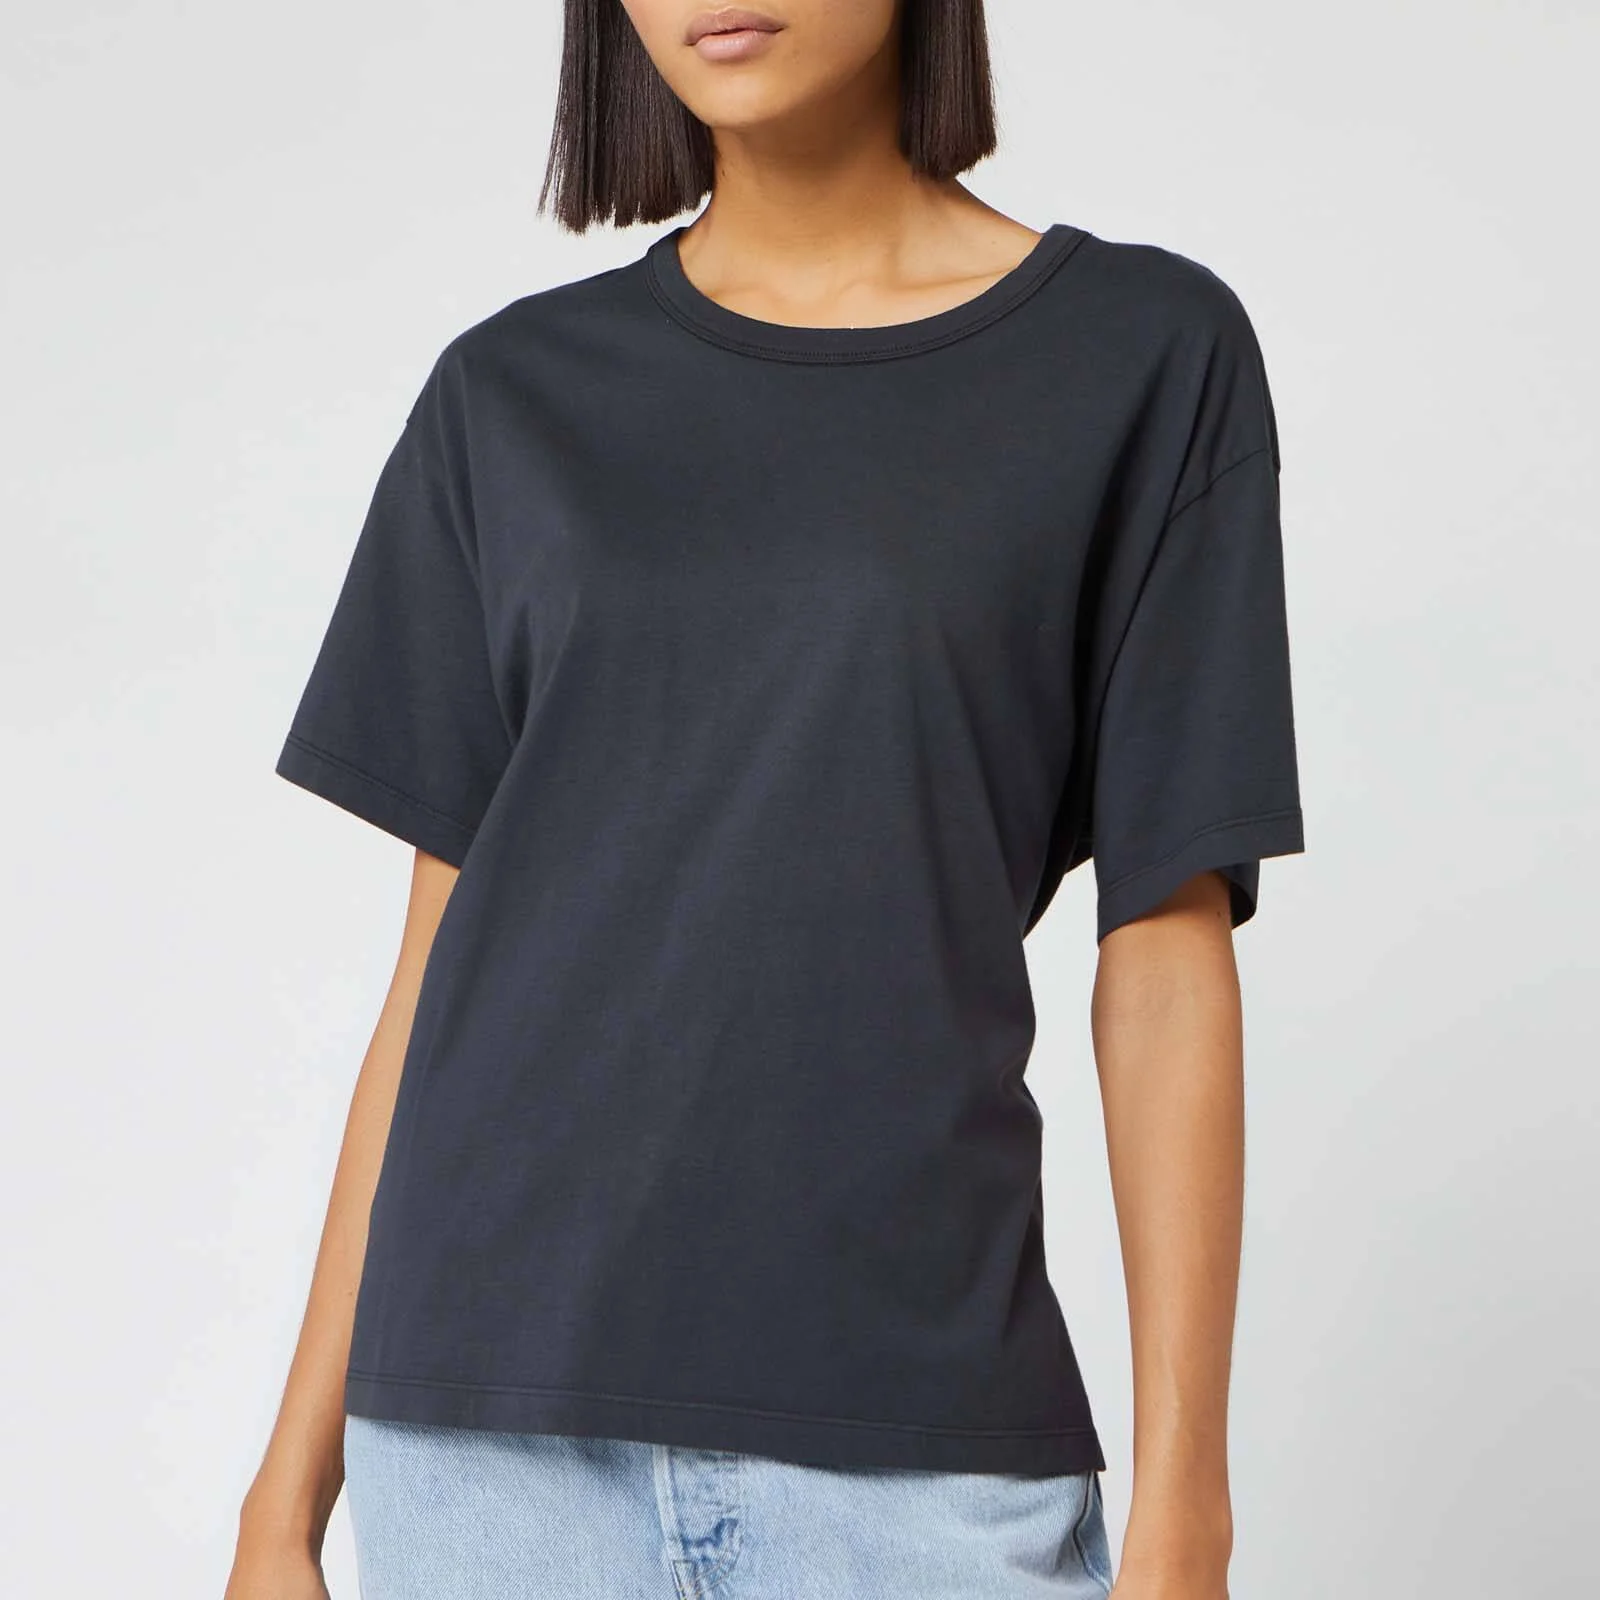 Levi's Women's Made and Crafted Lasso T-Shirt - Jet Black Image 1